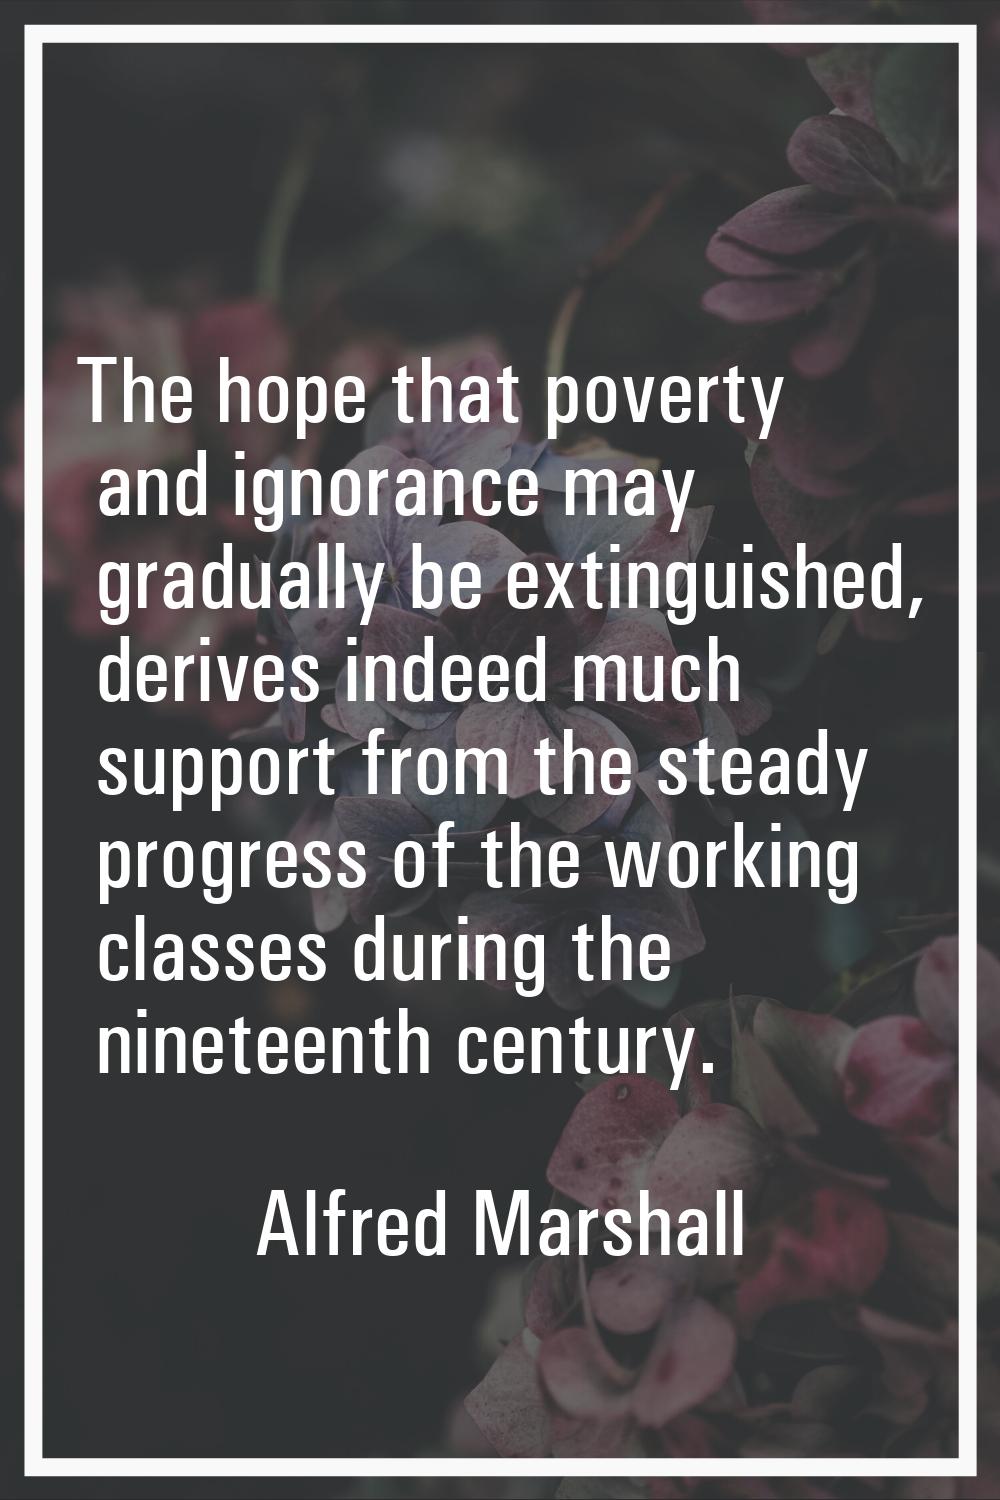 The hope that poverty and ignorance may gradually be extinguished, derives indeed much support from